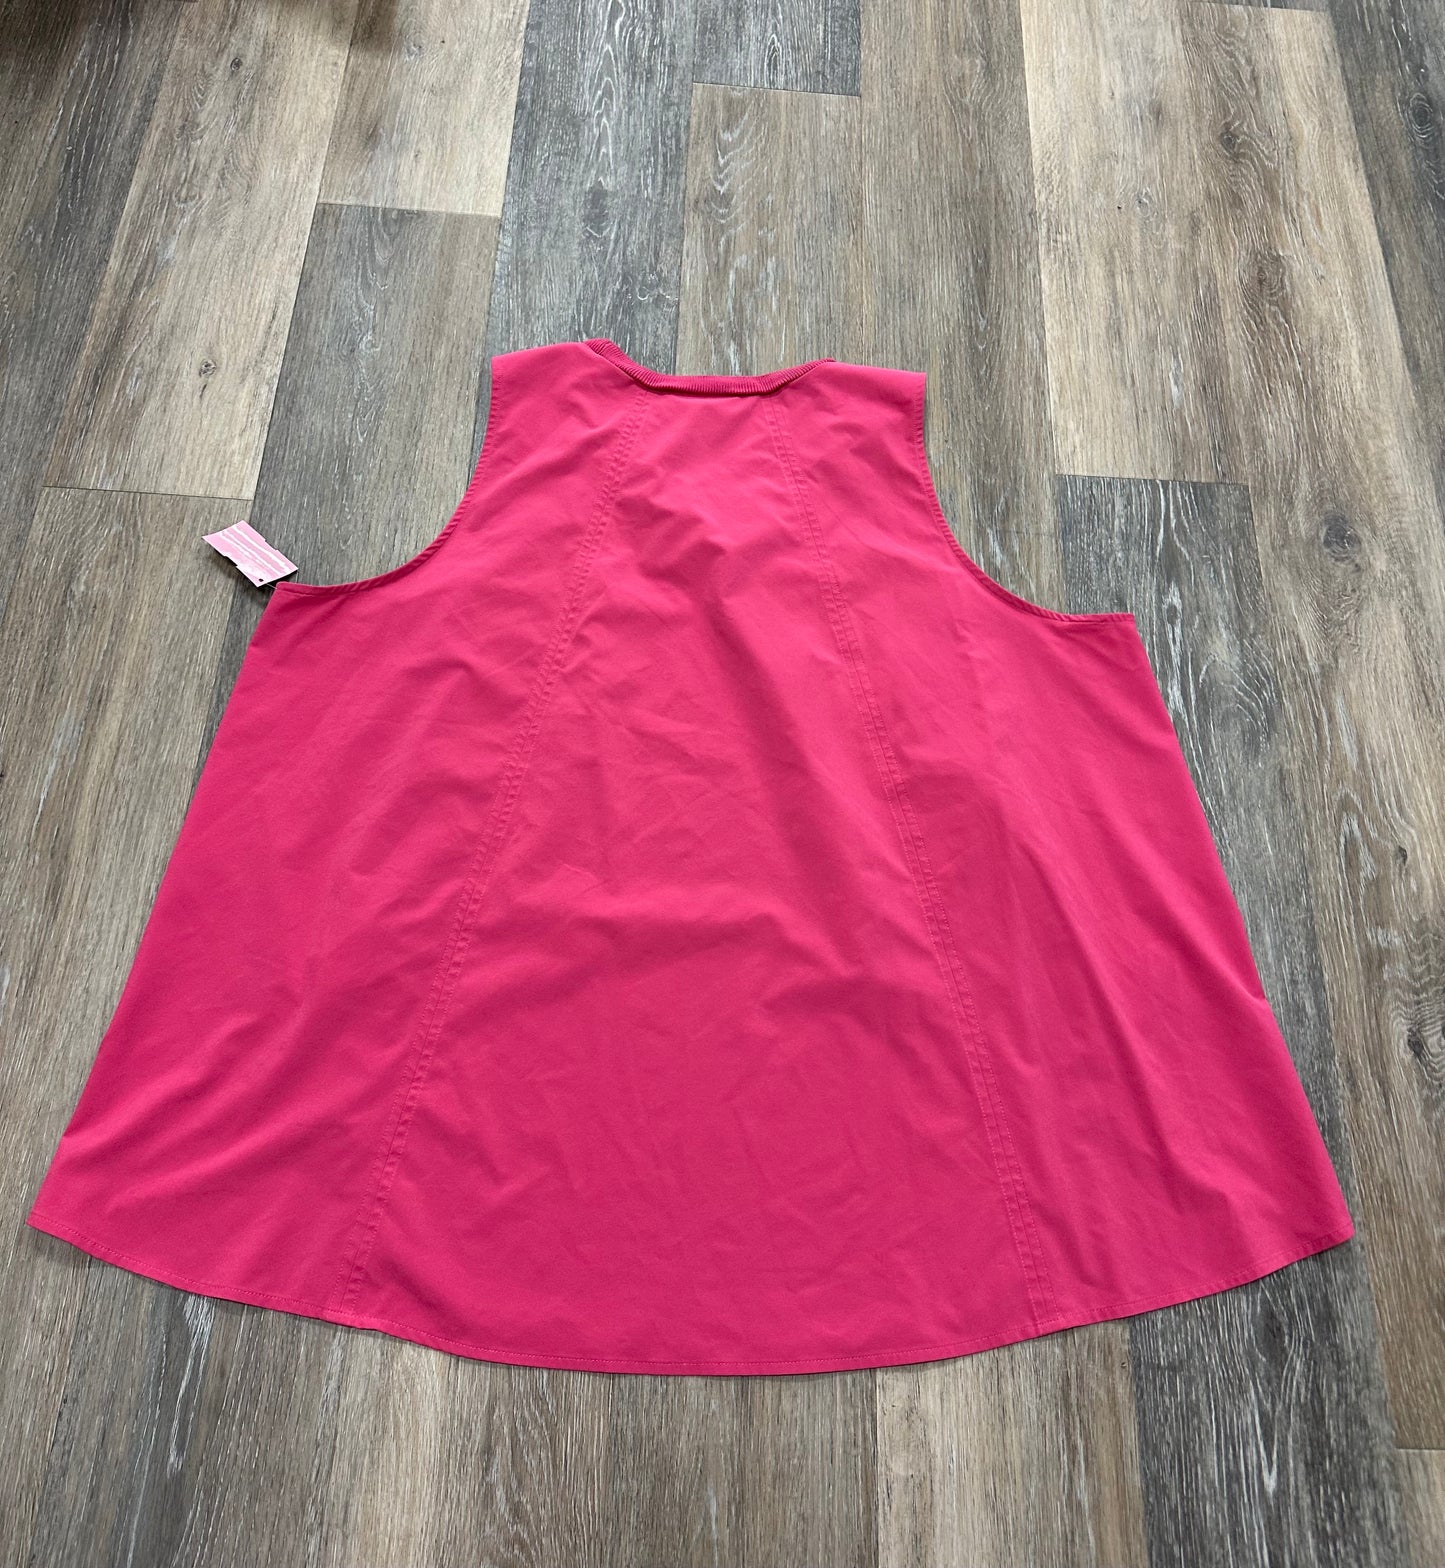 Athletic Tank Top By Athleta  Size: 2x